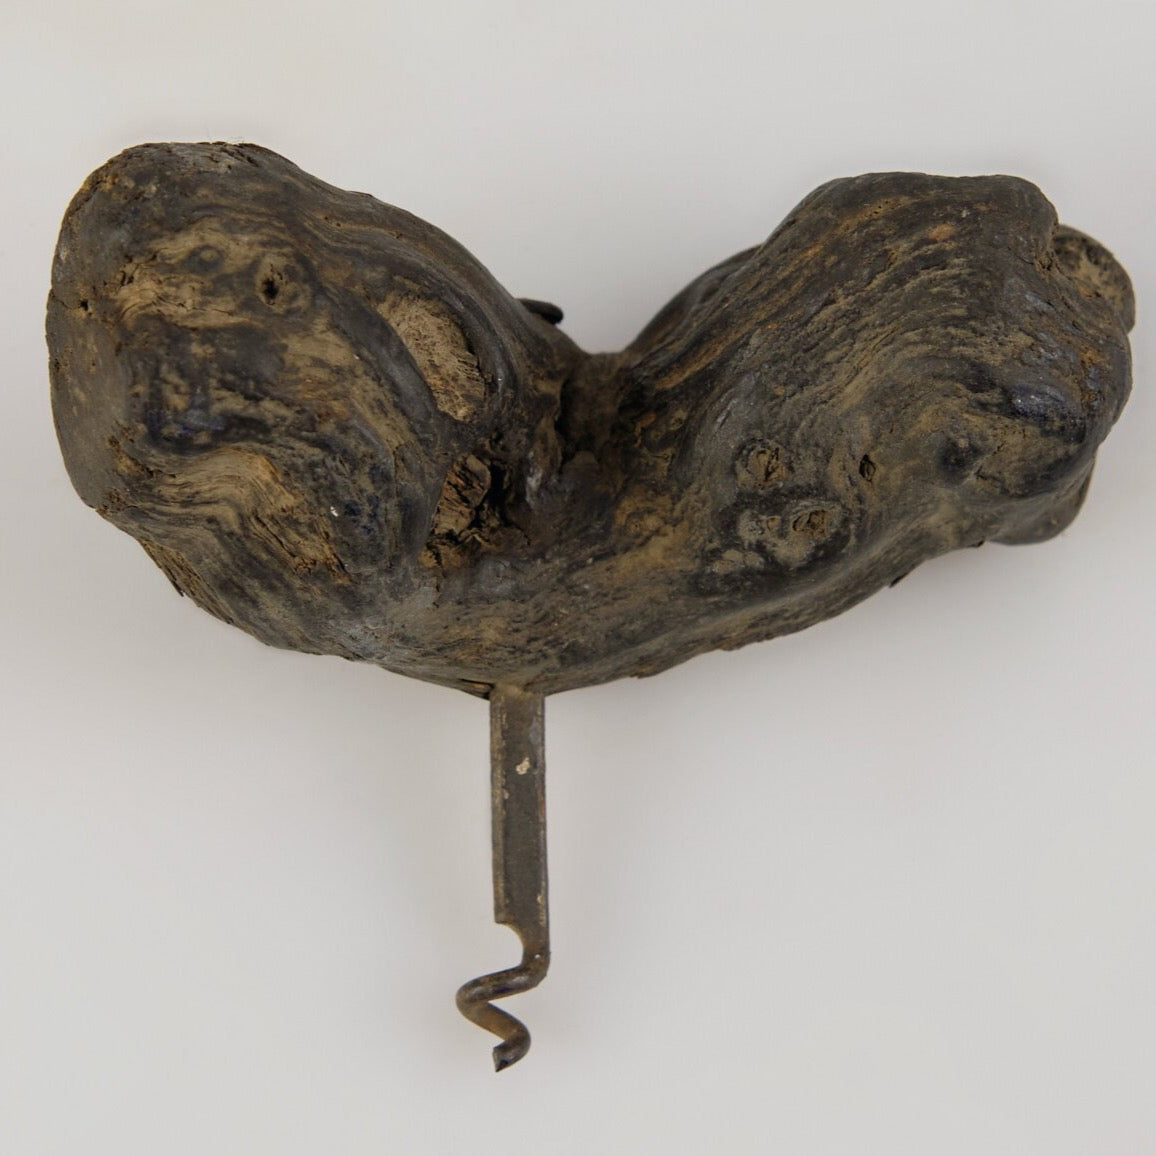 Wooden bottle opener from North Africa